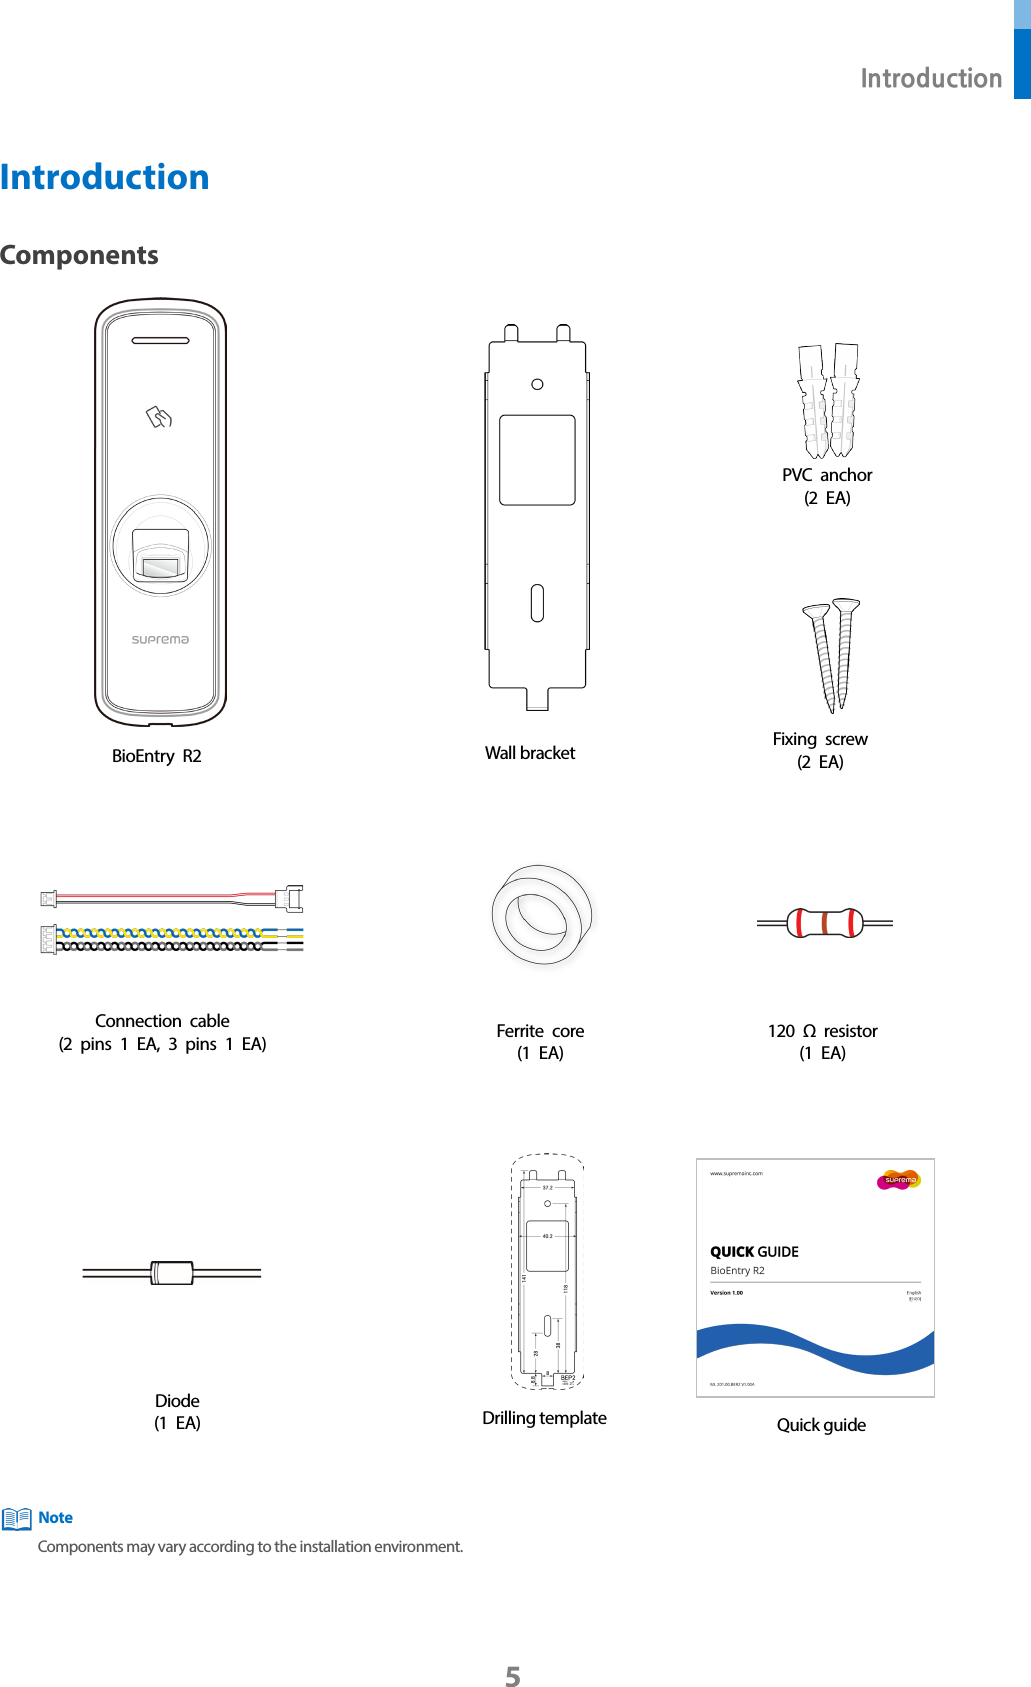  Introduction 5 Introduction Components    Components may vary according to the installation environment.      Note BioEntry  R2 Wall bracket PVC anchor (2 EA) Fixing screw (2 EA)  Diode (1 EA) 120 Ω resistor (1 EA)  Drilling template Quick guide Ferrite core (1 EA)  Connection cable (2 pins 1 EA, 3 pins 1  EA)  